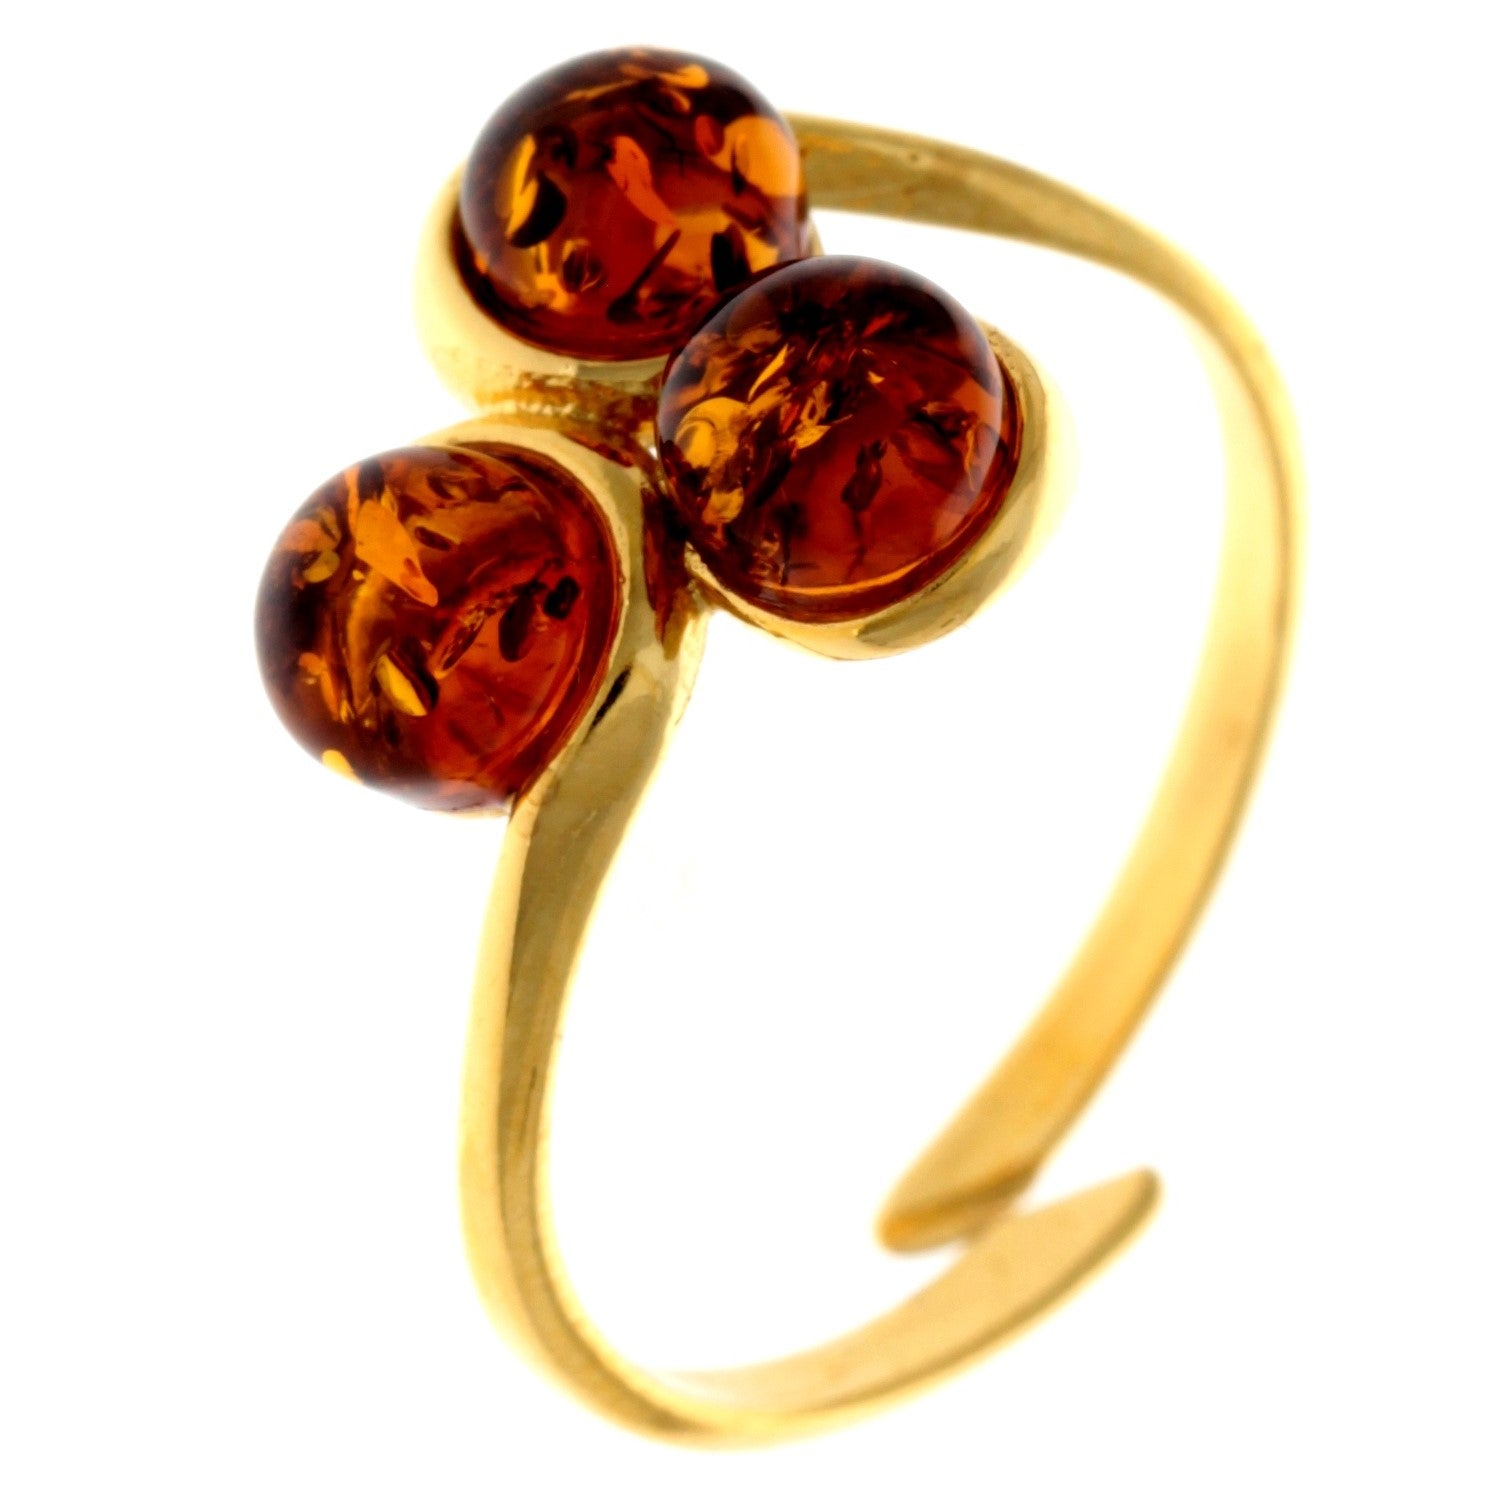 Genuine Baltic Amber and 925 Sterling Silver Gold Plated with 1 micron of 22 Carat Gold Adjustable Ring - MG402